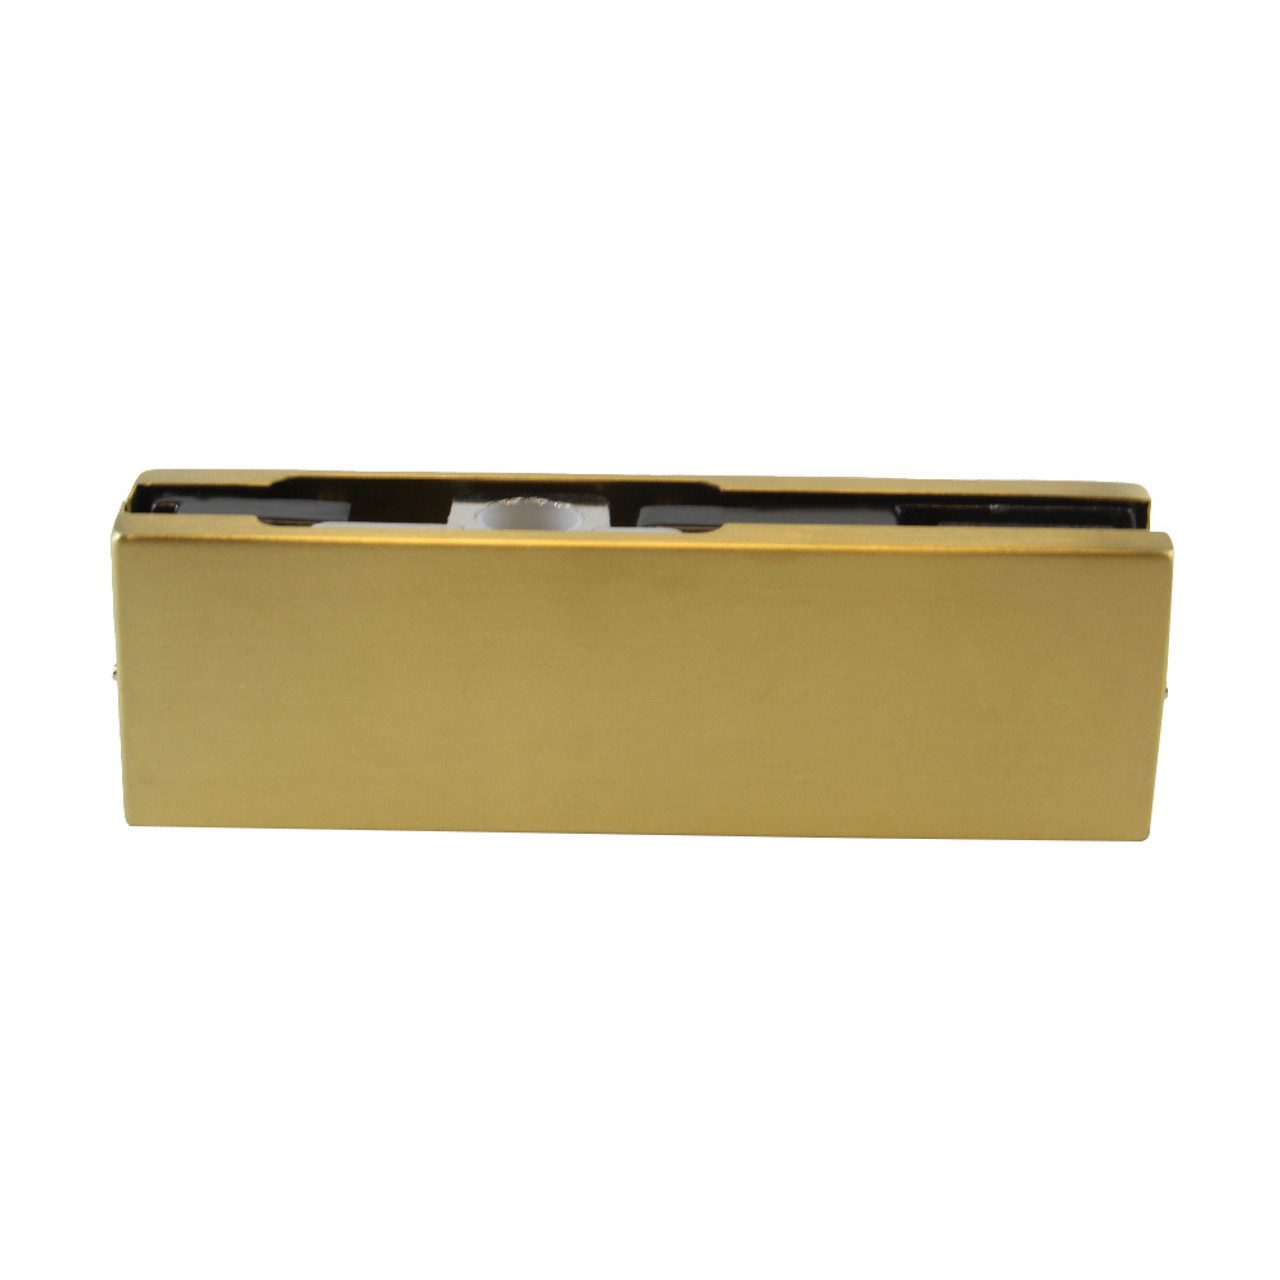 PF2BG | Top Door Patch Fitting small plate Brush Gold Finish